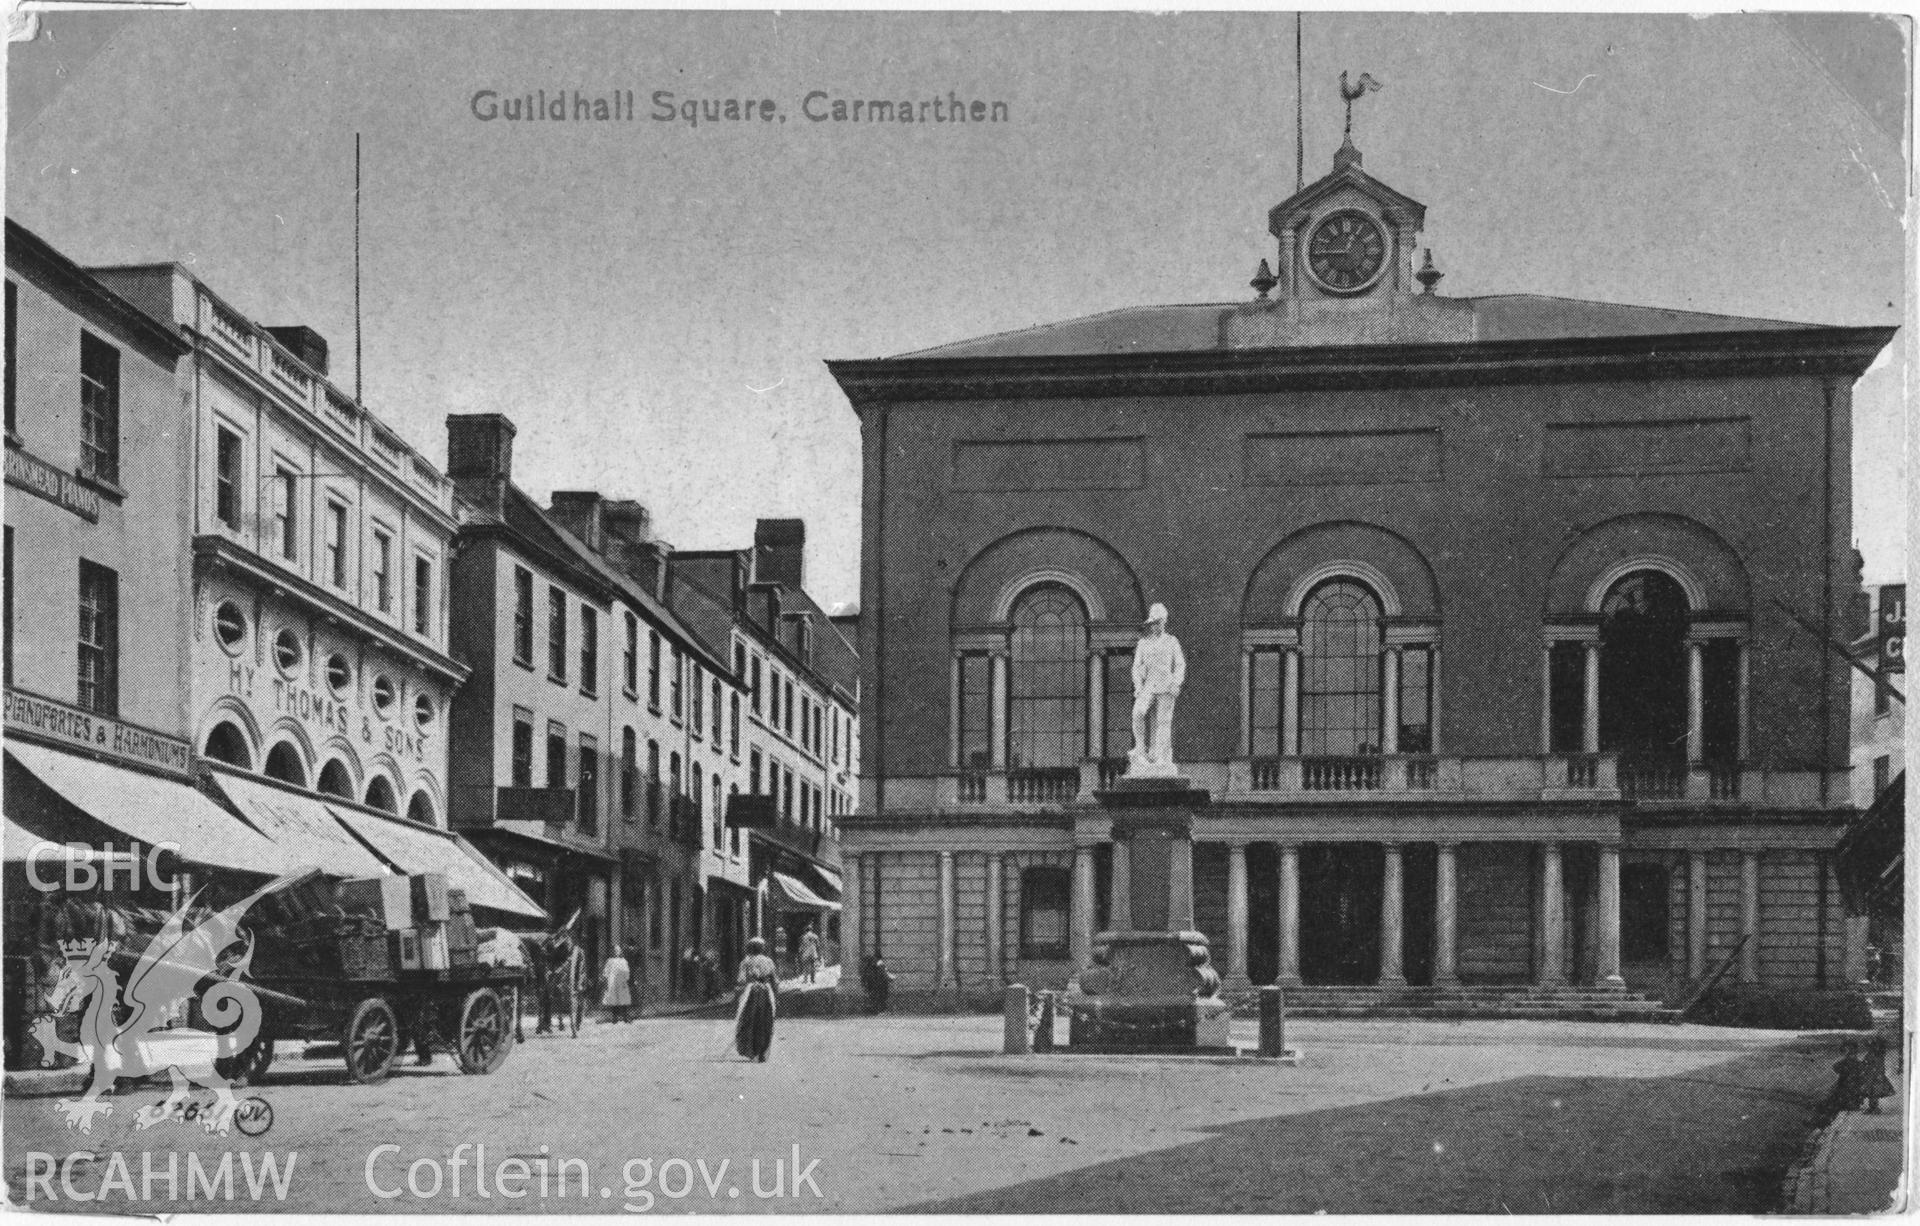 Copy of b/w postcard of Guildhall Square, Carmarthen, copied from original loaned by Thomas Lloyd.  Copy negative held.